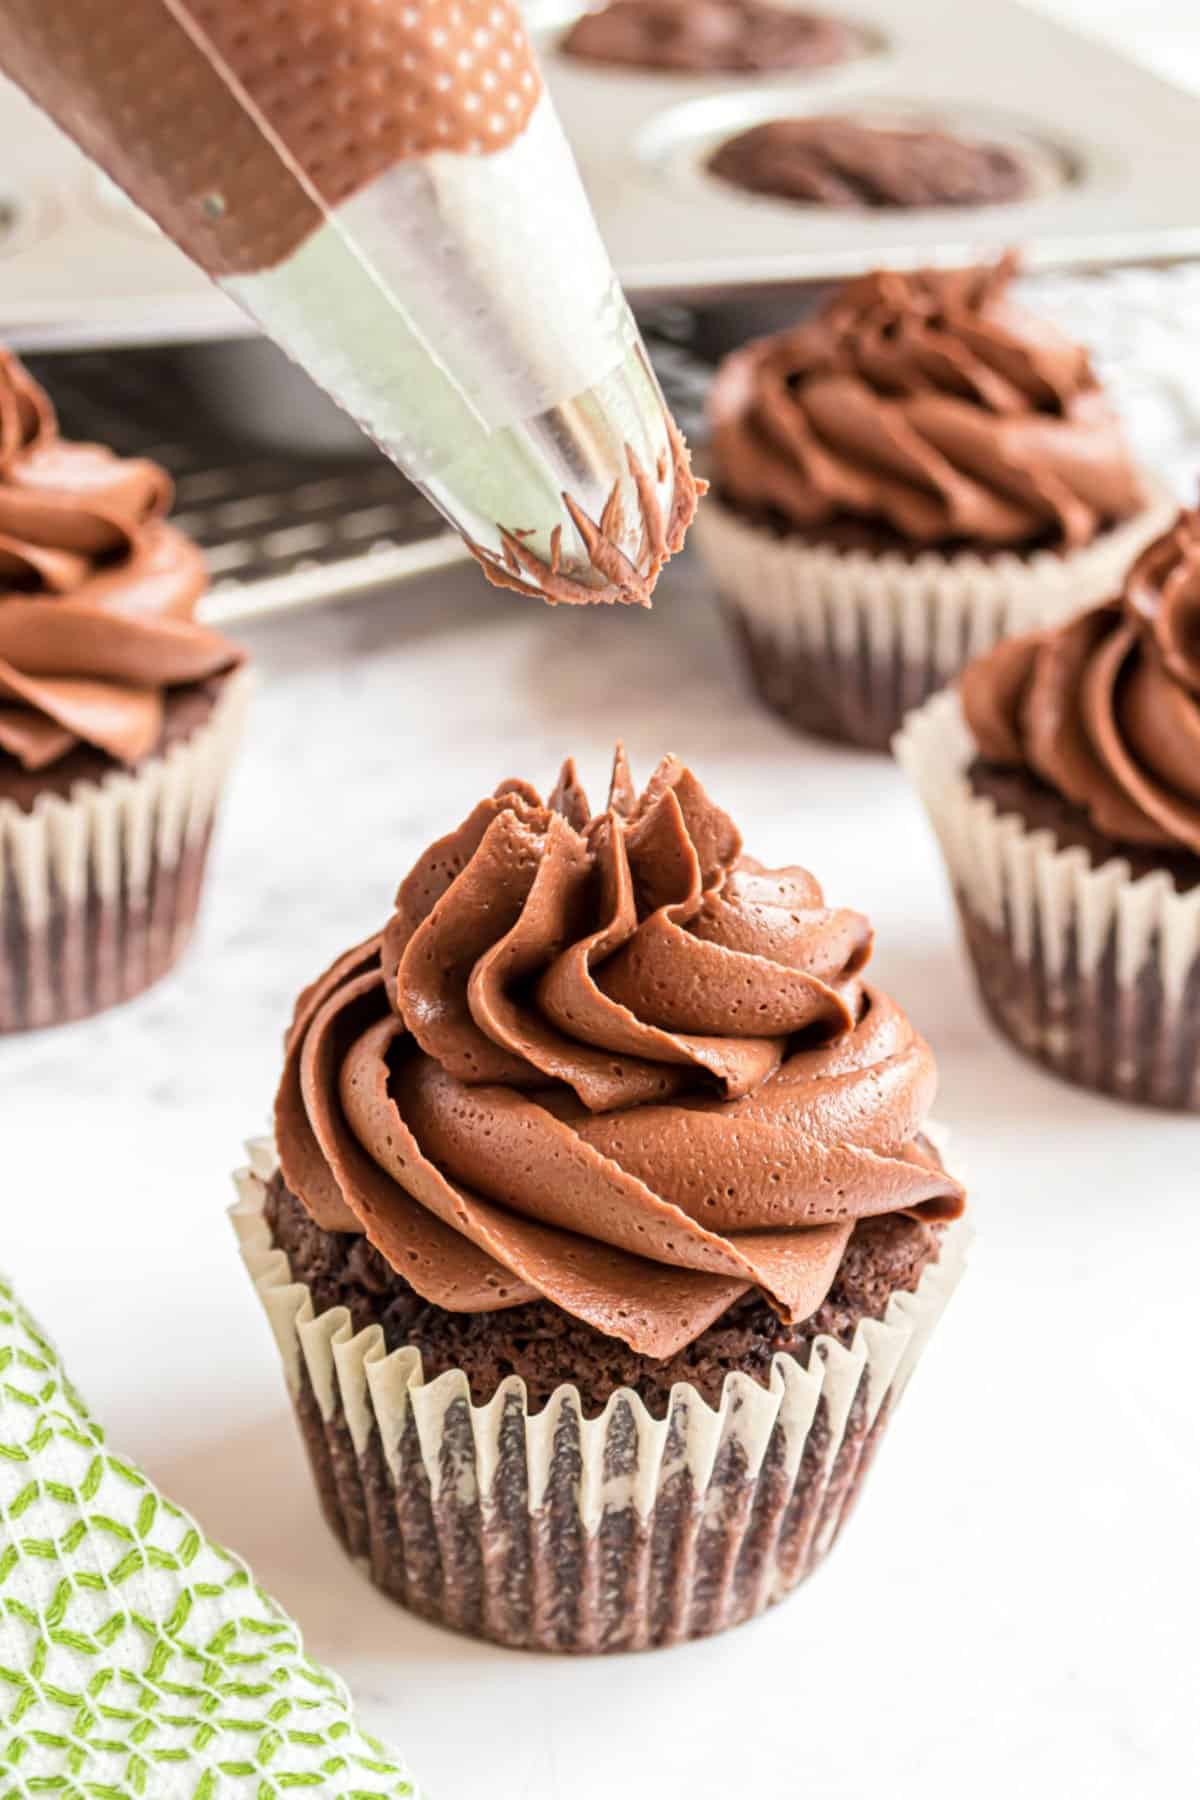 Chocolate frosting being piped onto a chocolate cupcake.